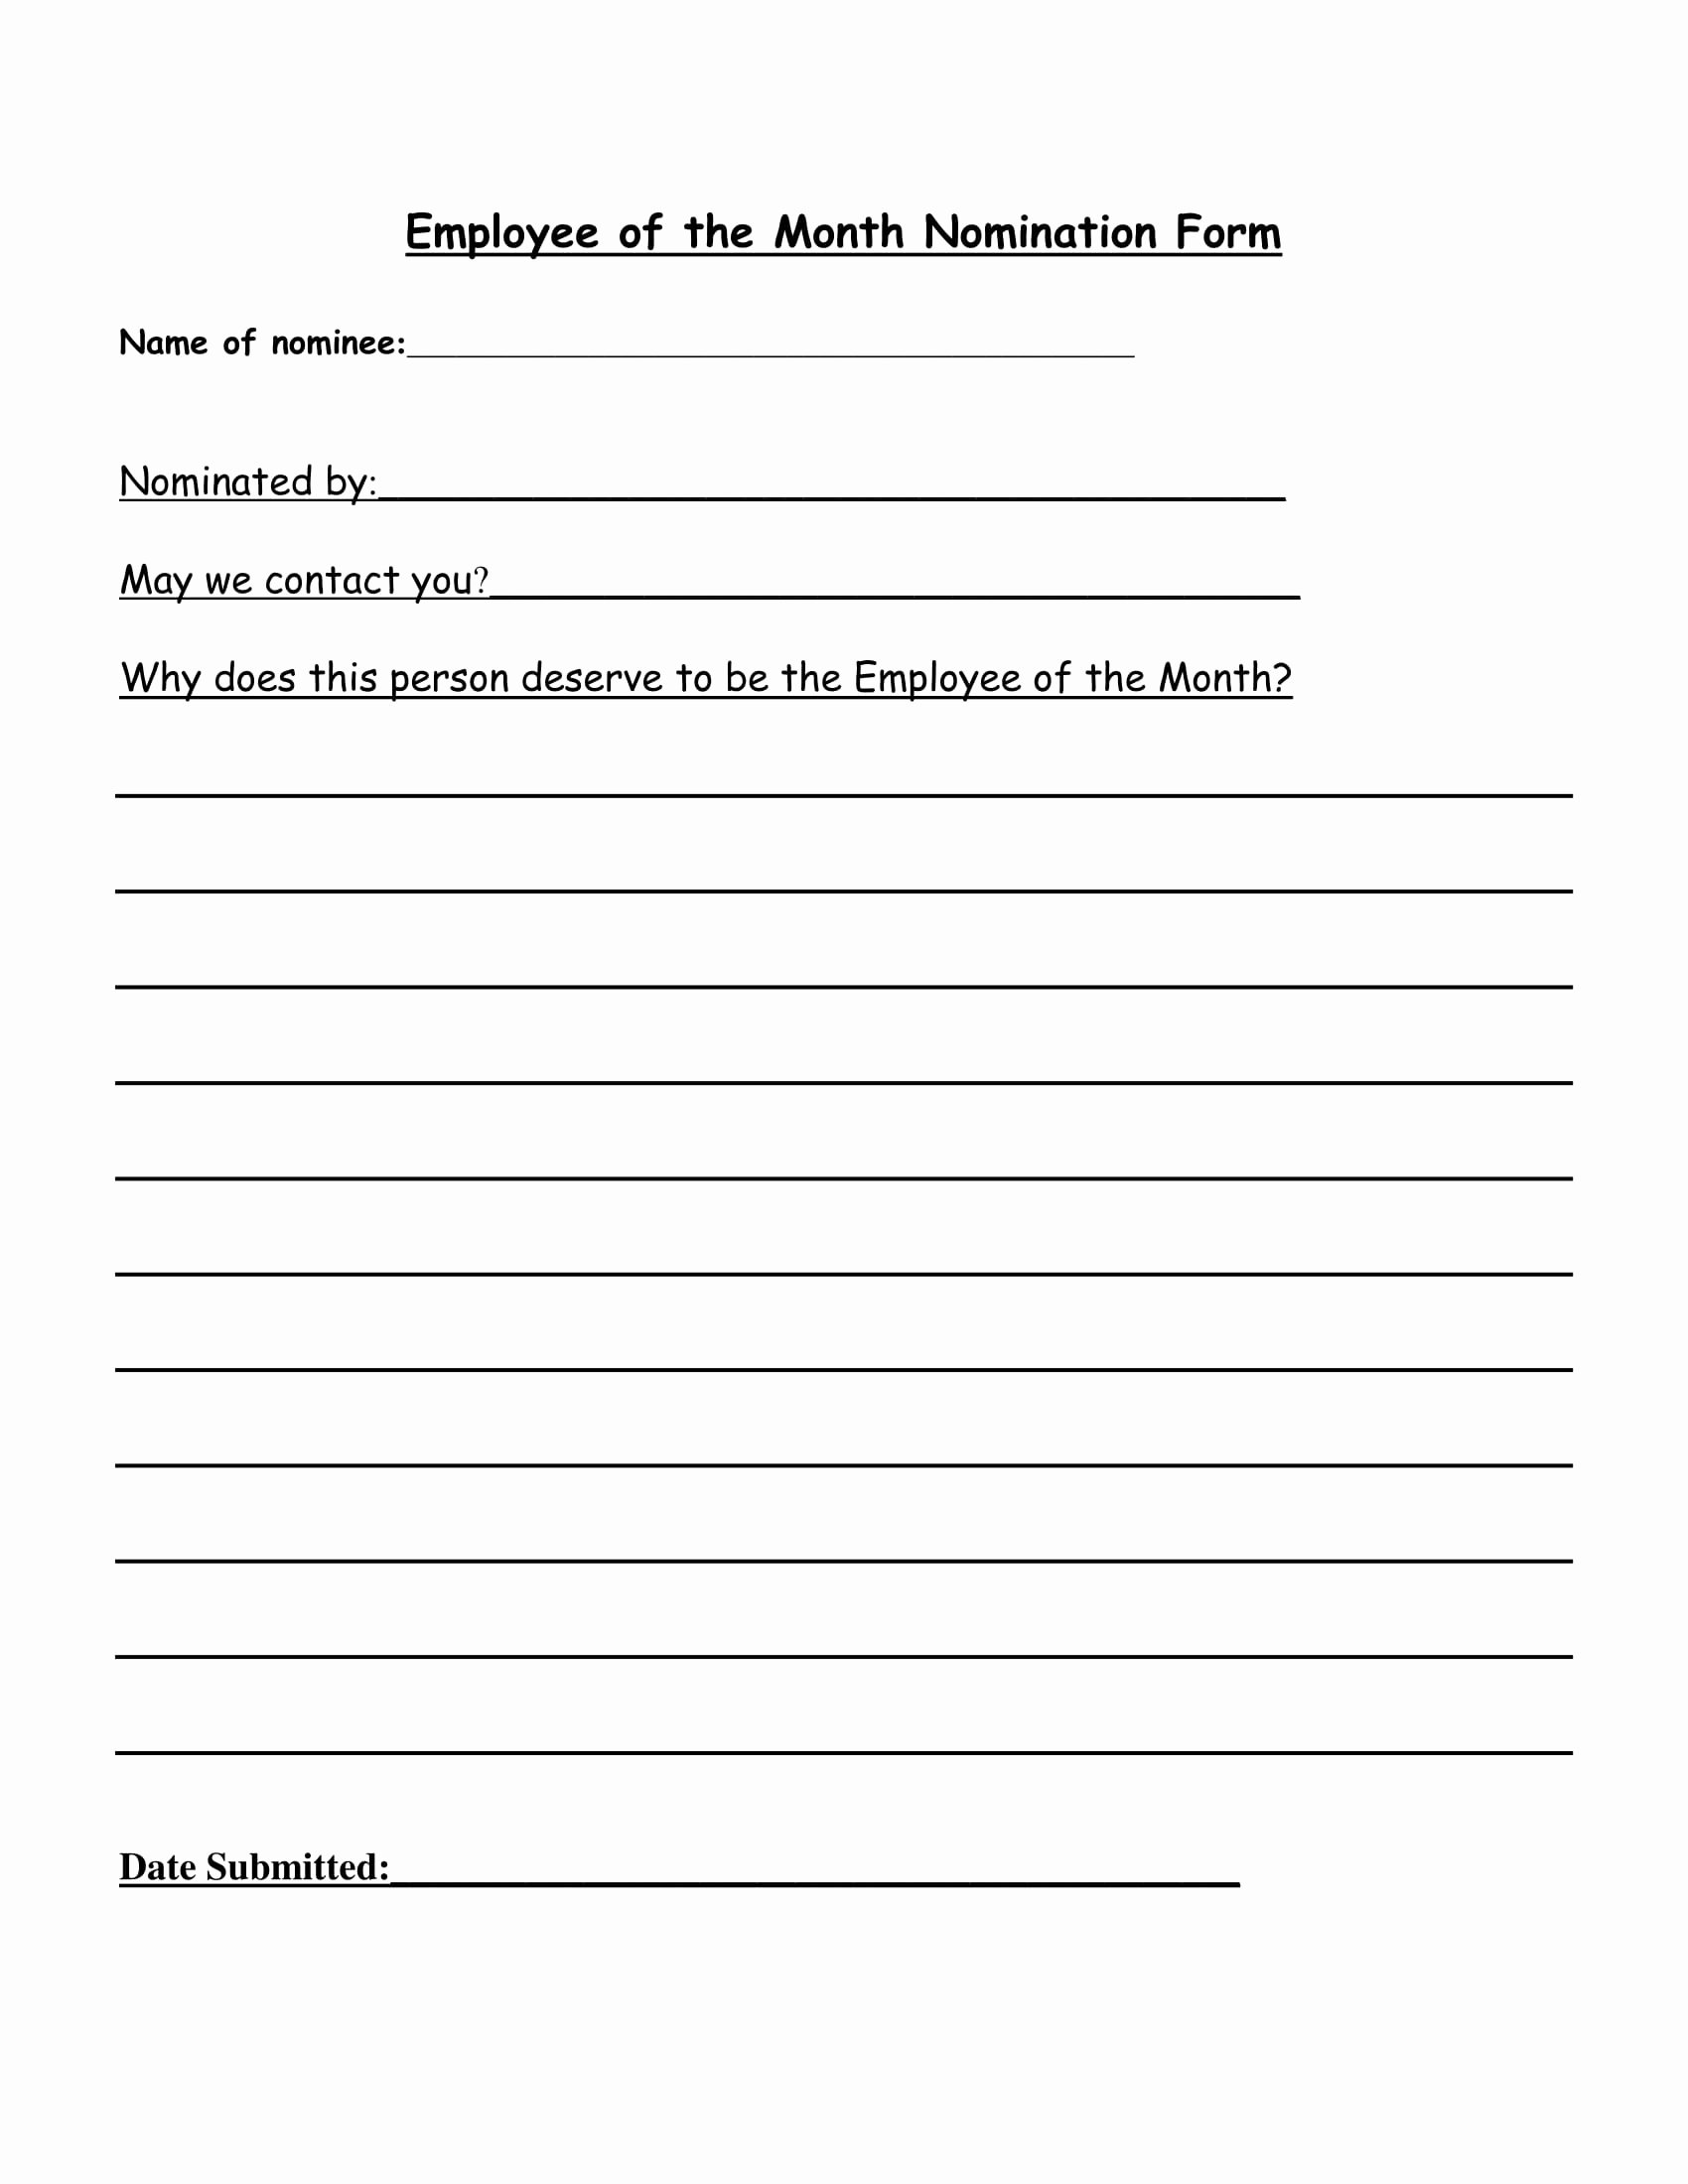 Employee Of the Month Template Awesome 4 Employee Of the Month Voting forms Word Pdf